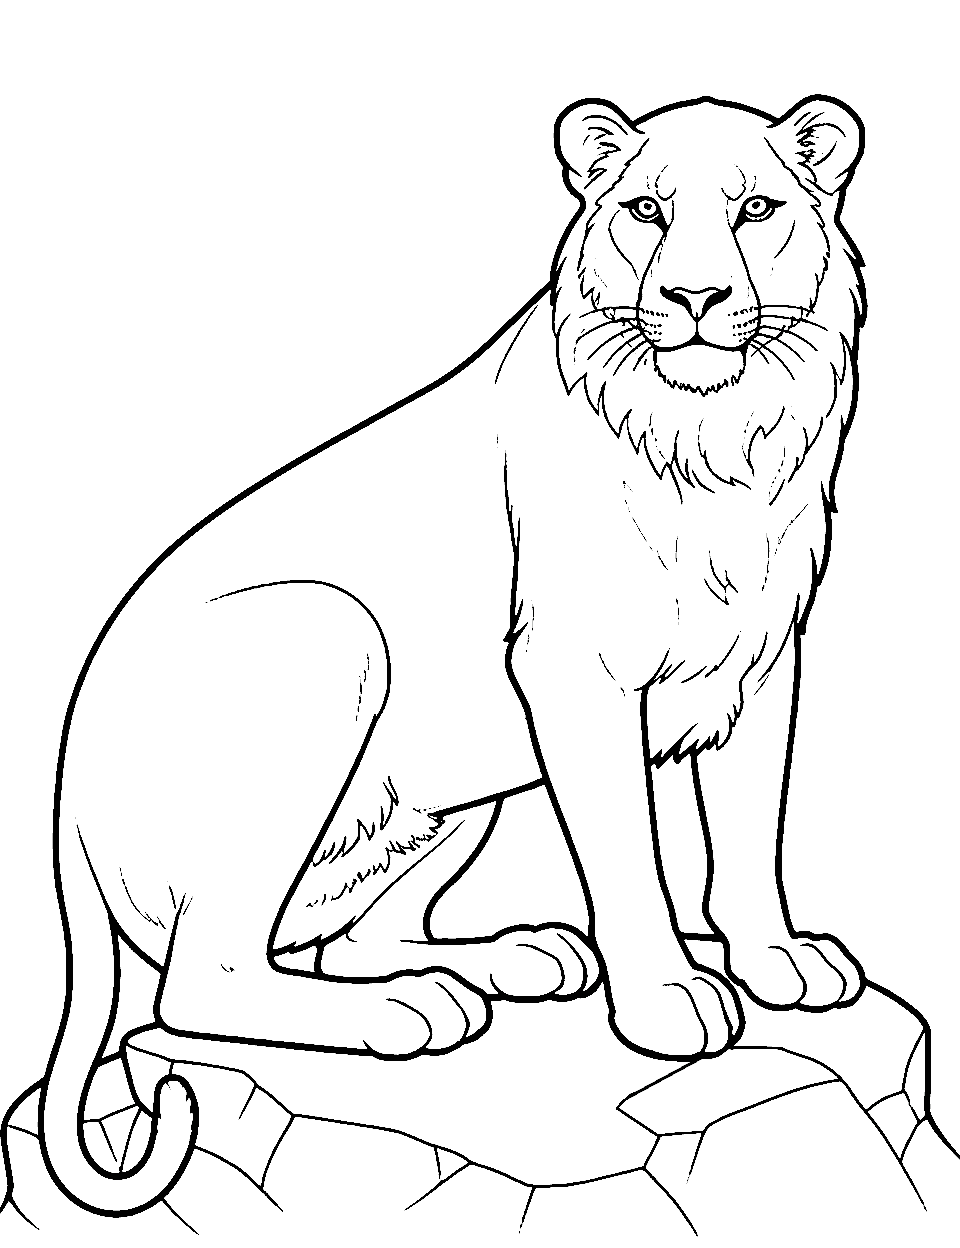 Mountain Lion's Perch Coloring Page - A mountain lion resting atop a rocky cliff.